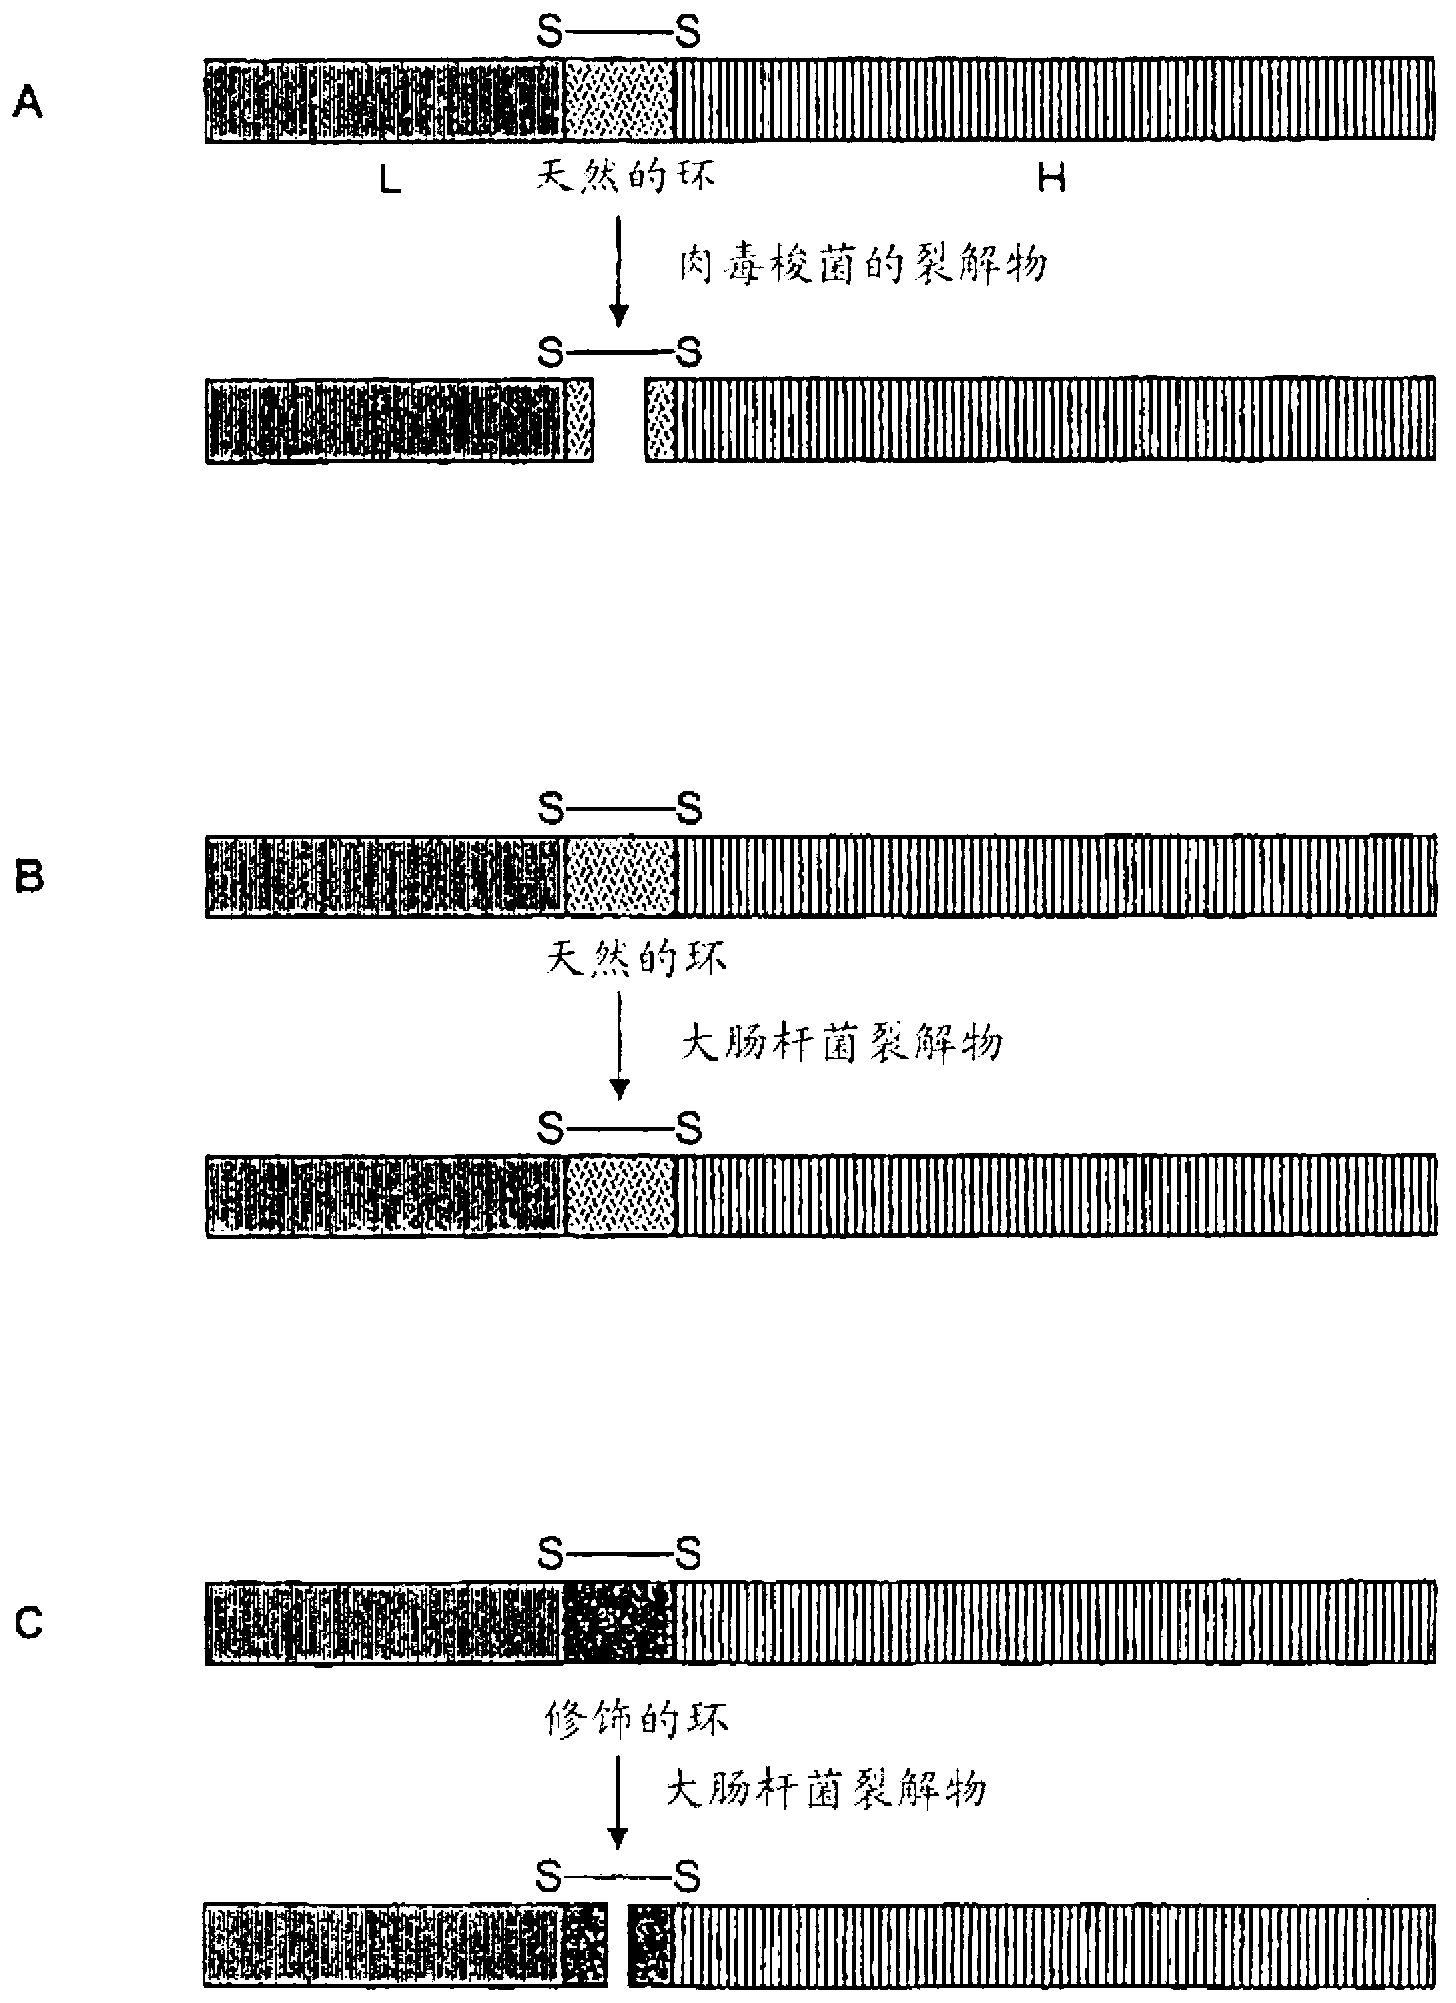 Recombinant expression of proteins in a disulfide-bridged, two-chain form